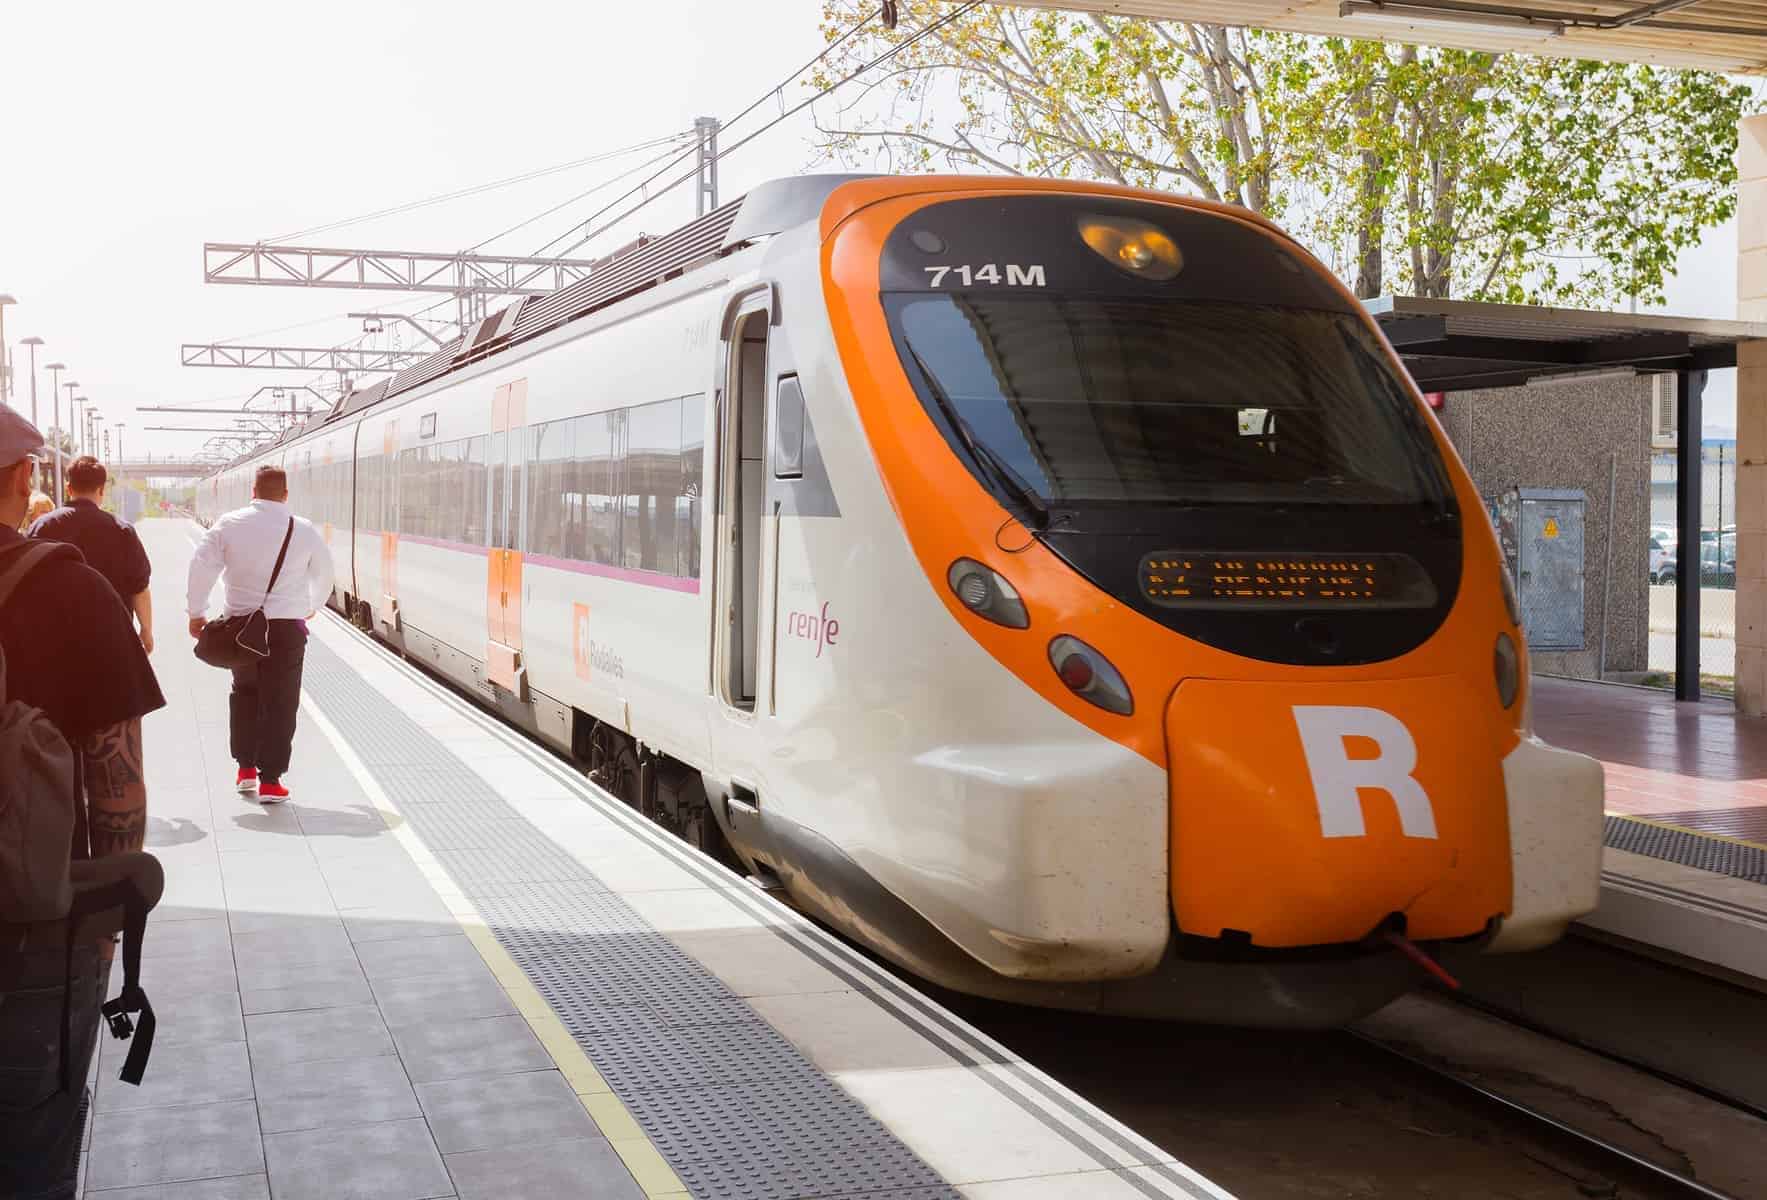 BARCELONA, SPAIN - Passengers Board the Renfe train at El Prat airport at the station